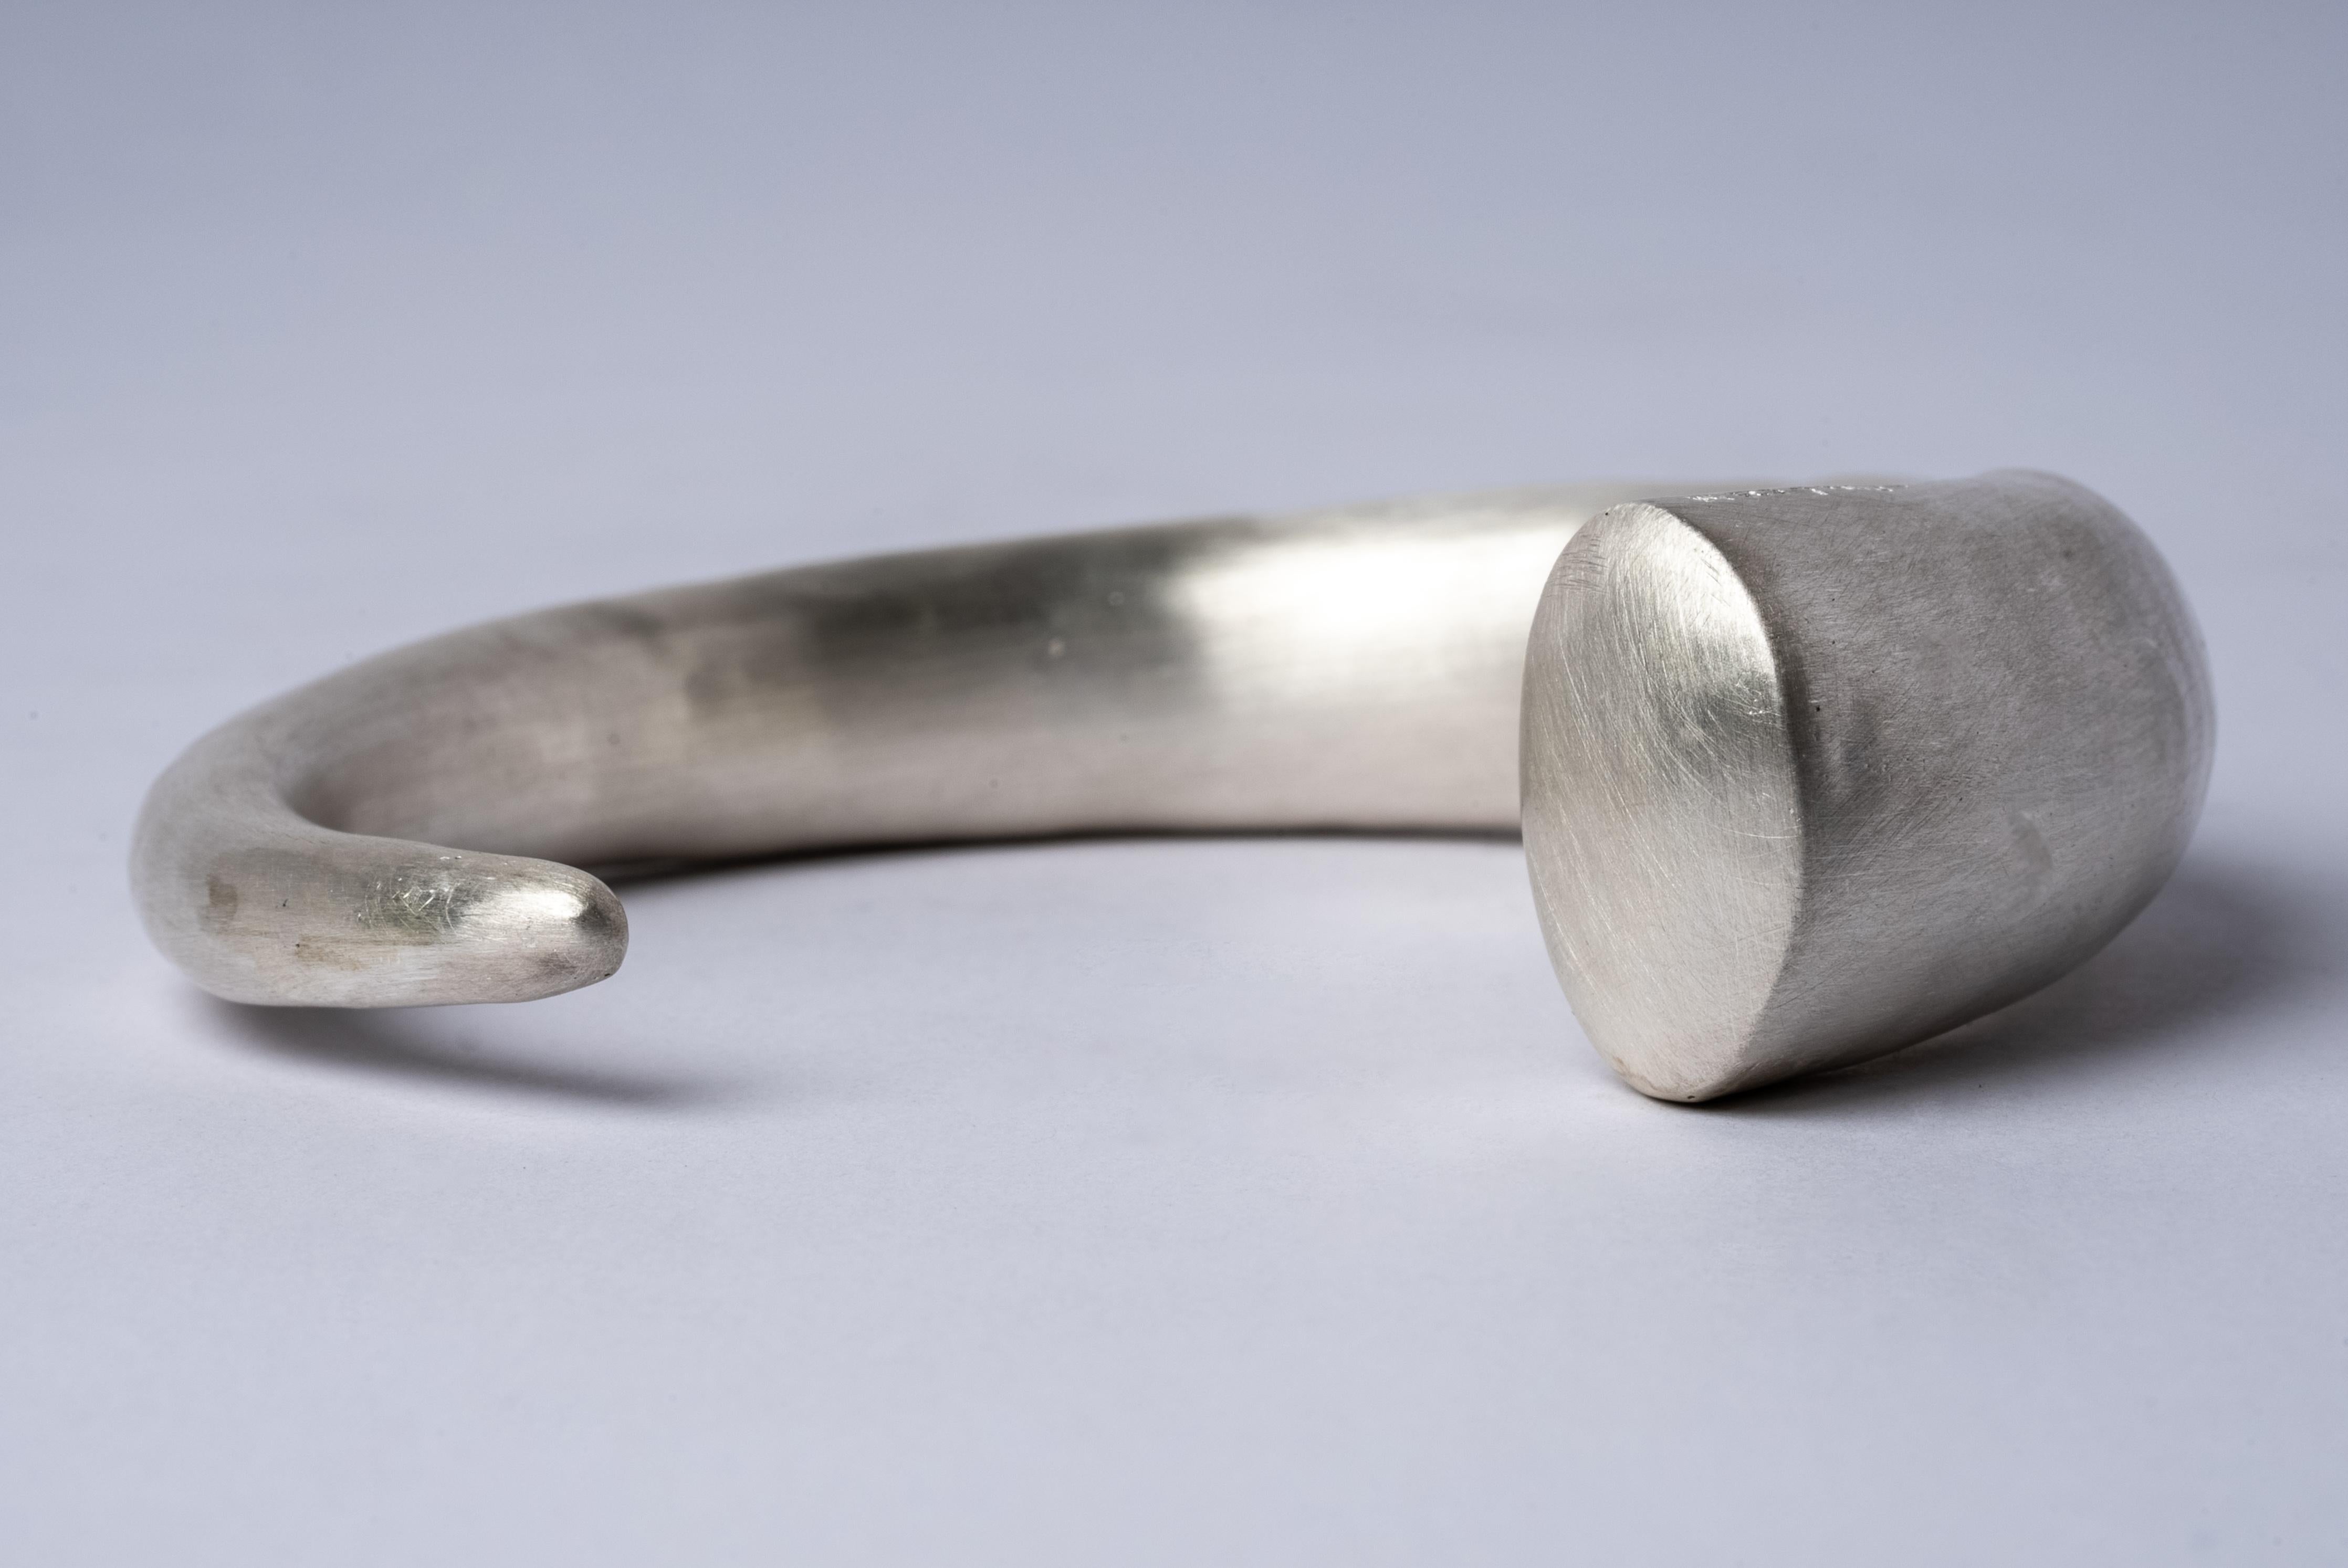 Horn bracelet in matte sterling silver. This piece is 100% hand fabricated from metal plate; cut into sections and soldered together to make the hollow three dimensional form. If sterling silver, the sheet metal is made by hand. The silver is melted